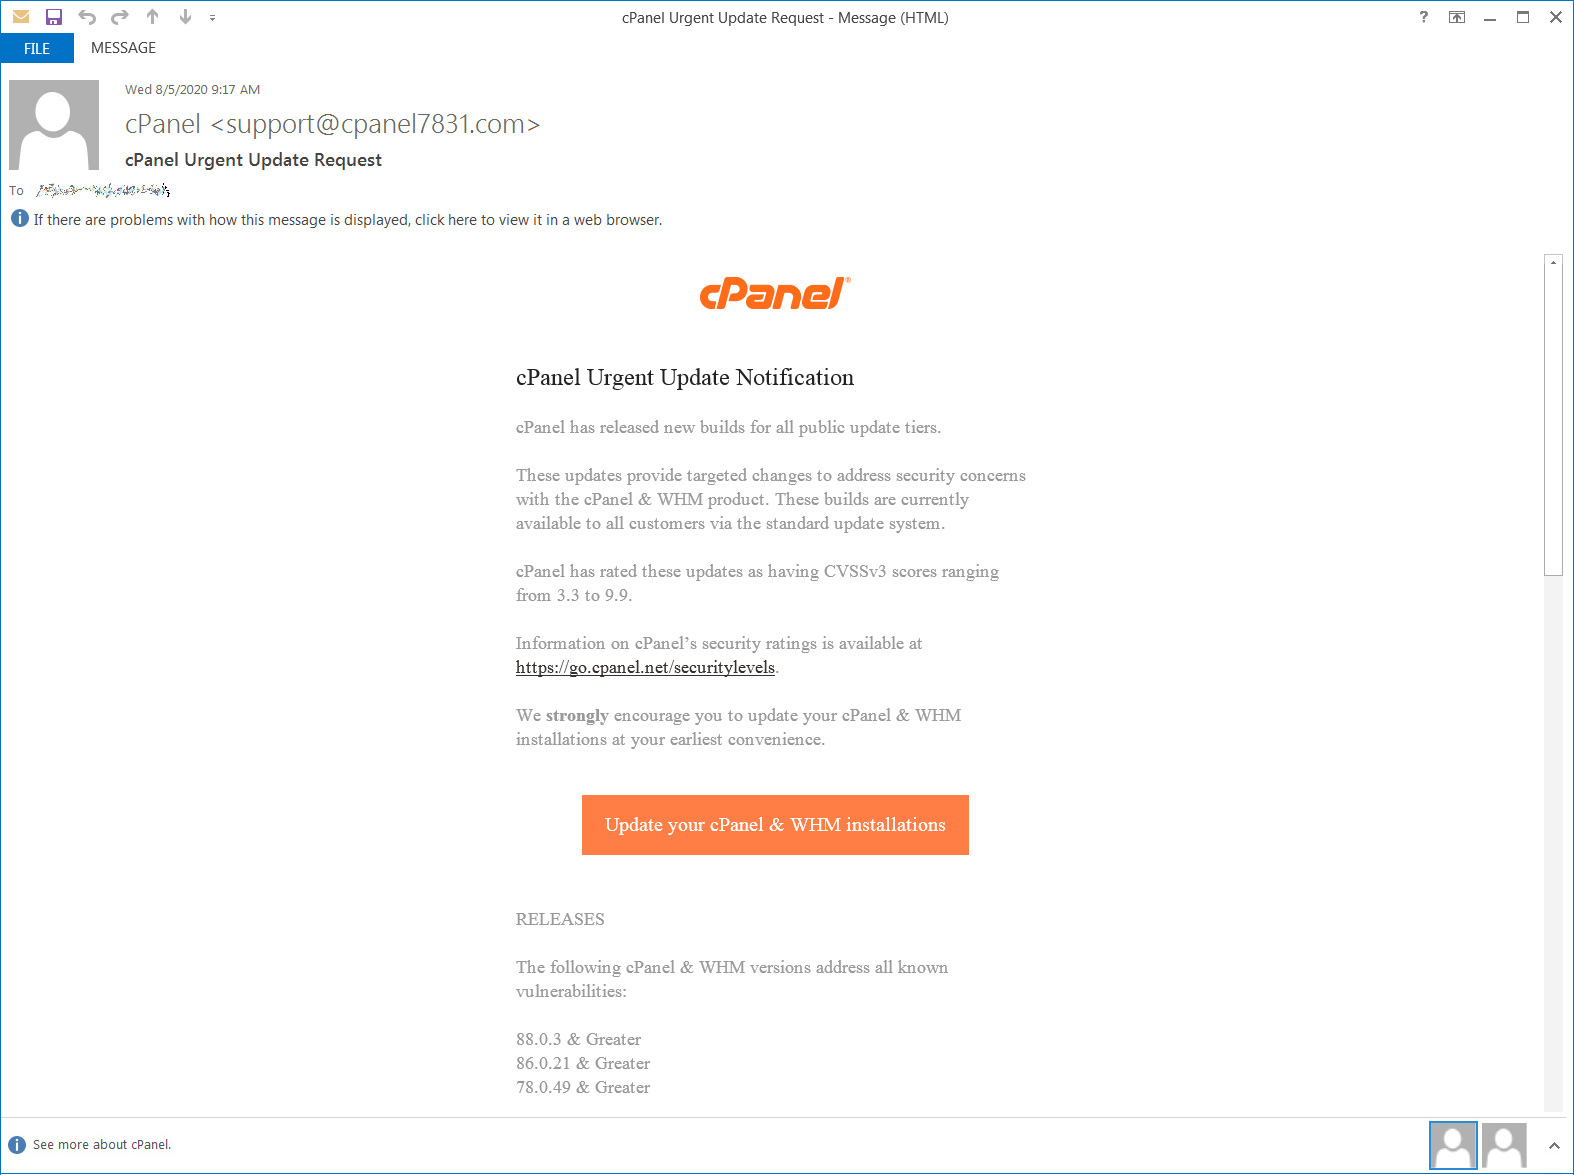 Fake security advisory from cPanel